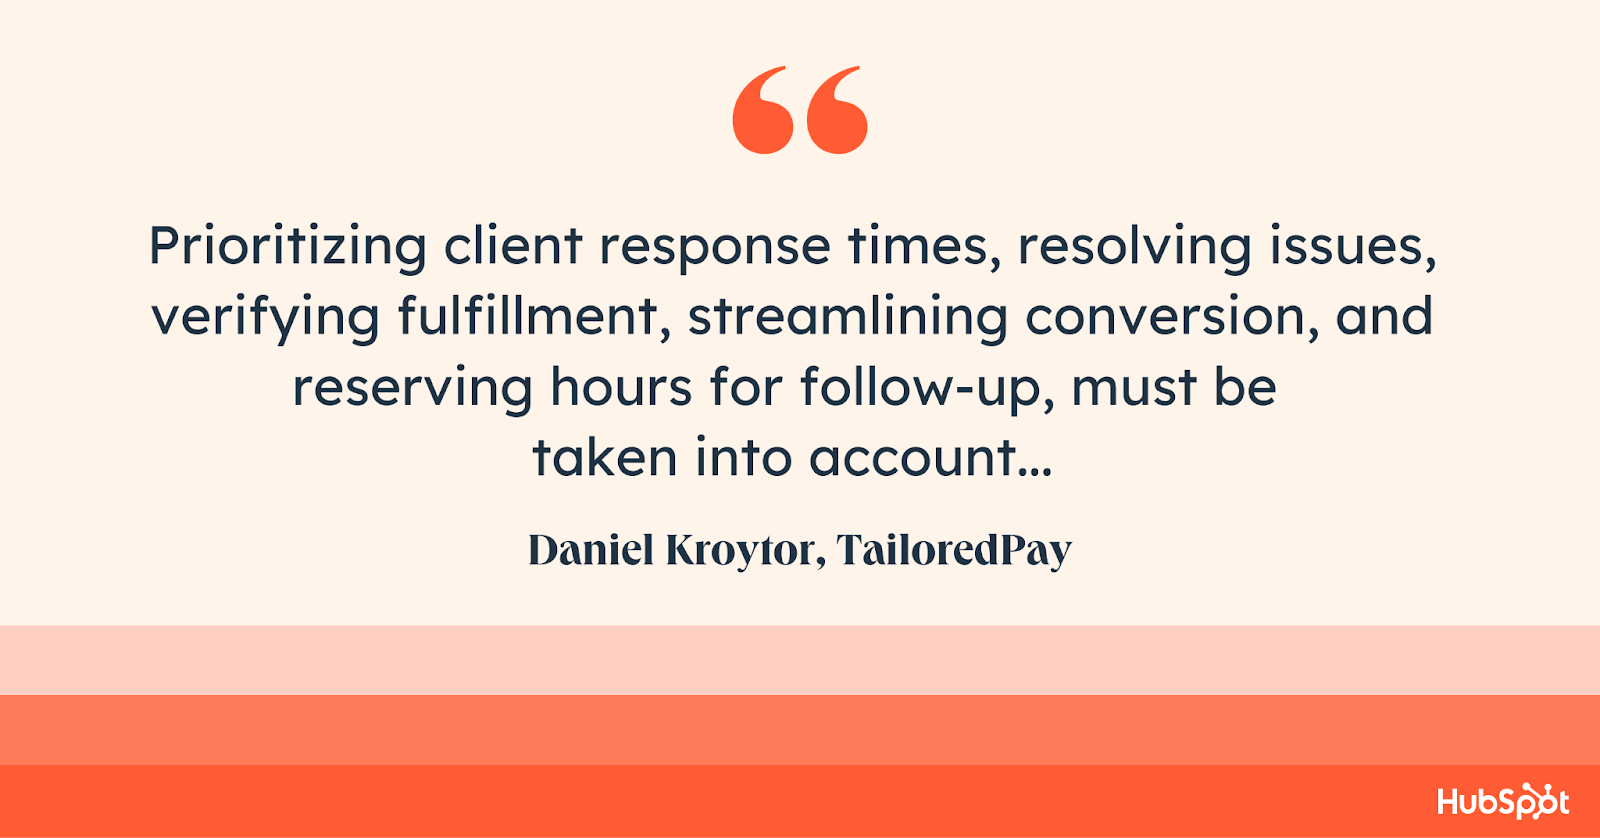 Daniel Kroytor, TailoredPay Prioritizing client response times, resolving issues, verifying fulfillment, streamlining conversion, and reserving hours for follow-up, must be 